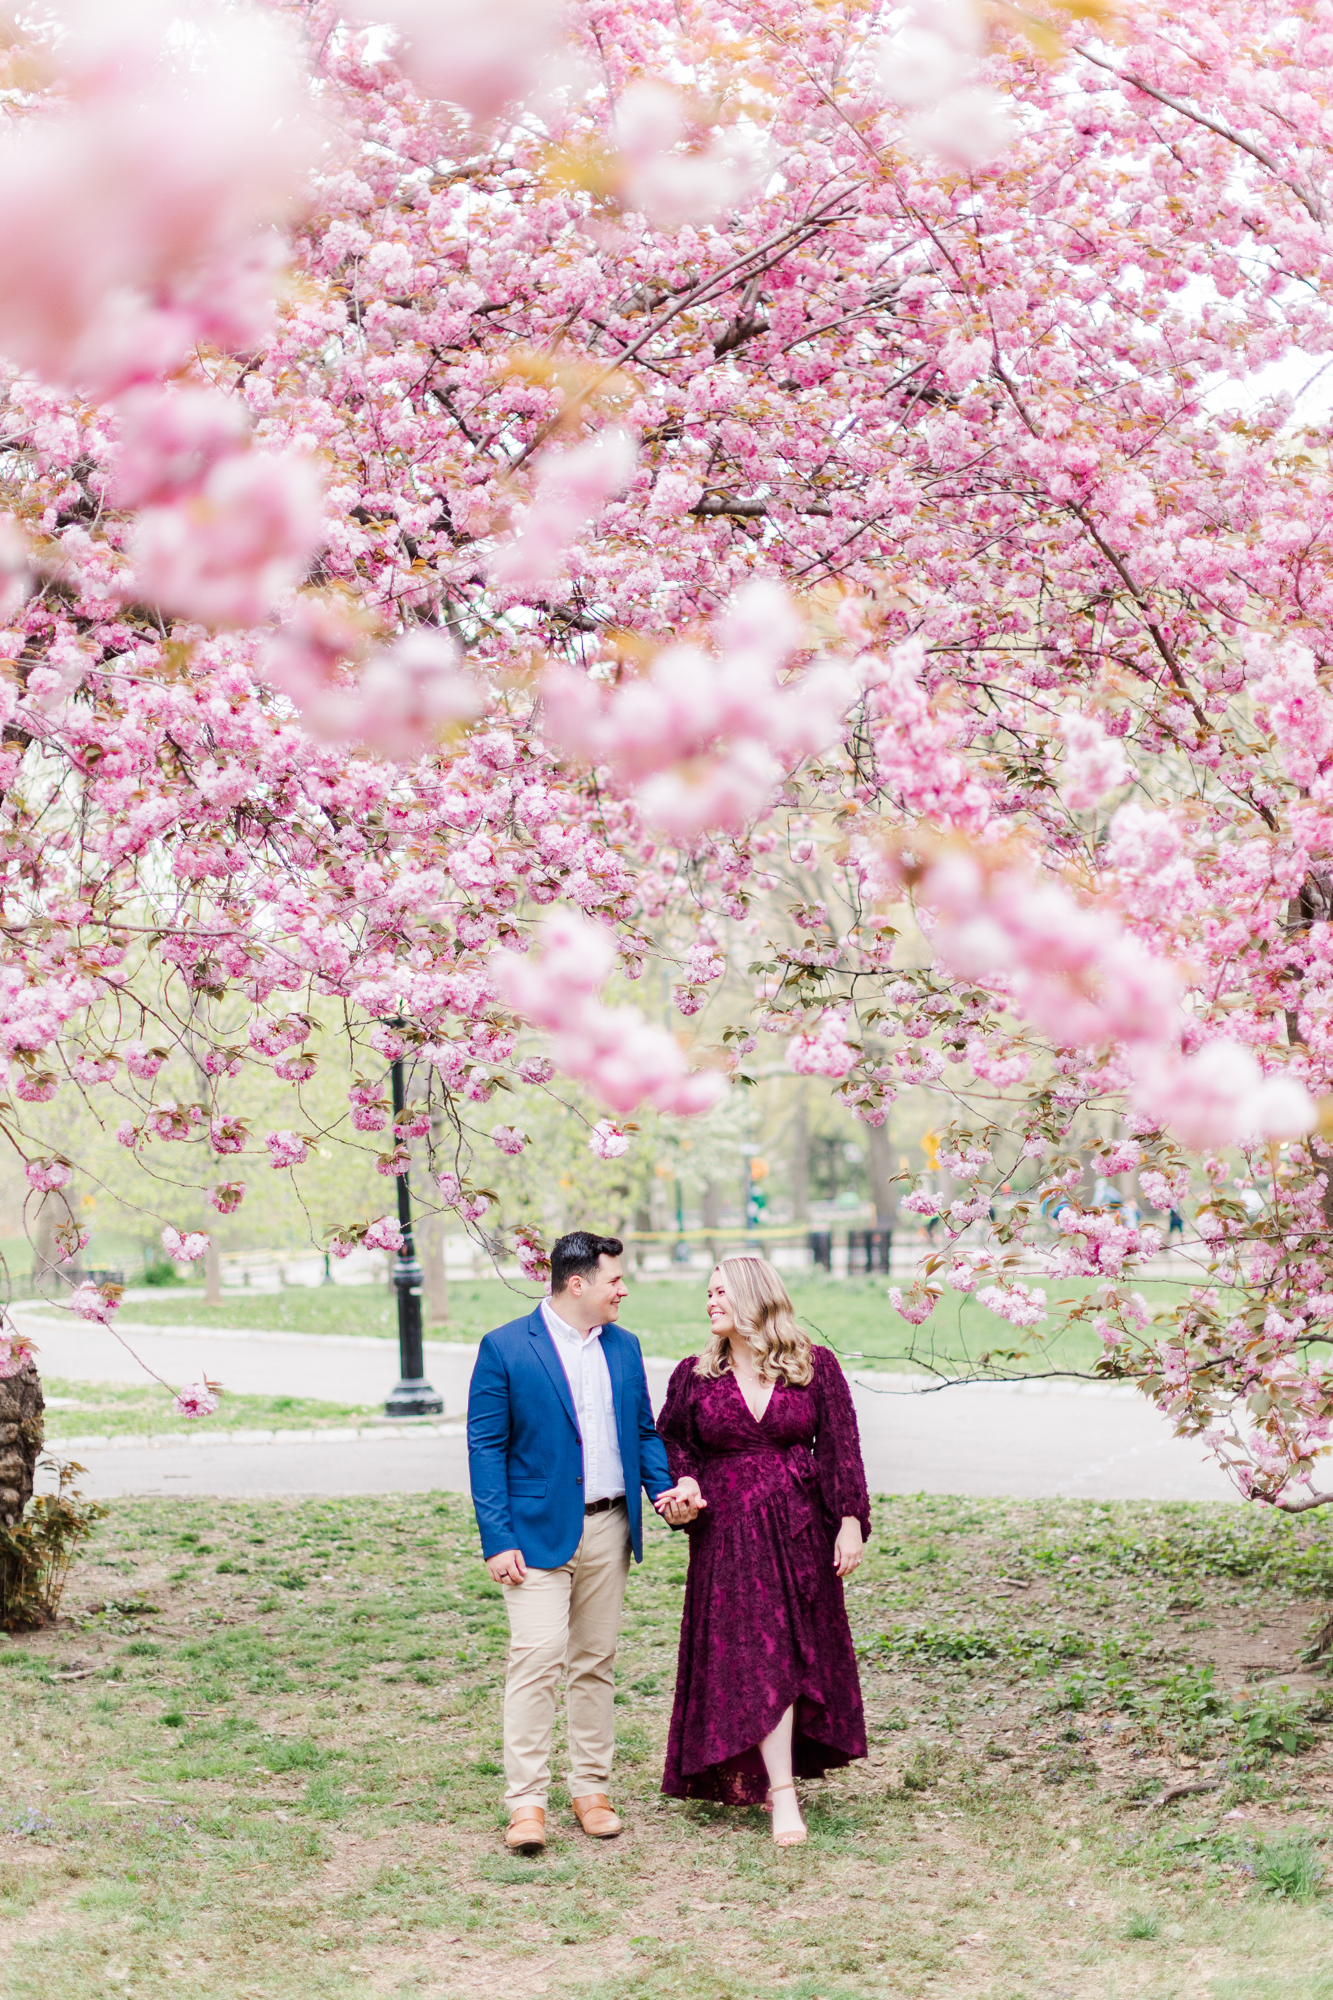 Stunning Engagement Photos in NYC